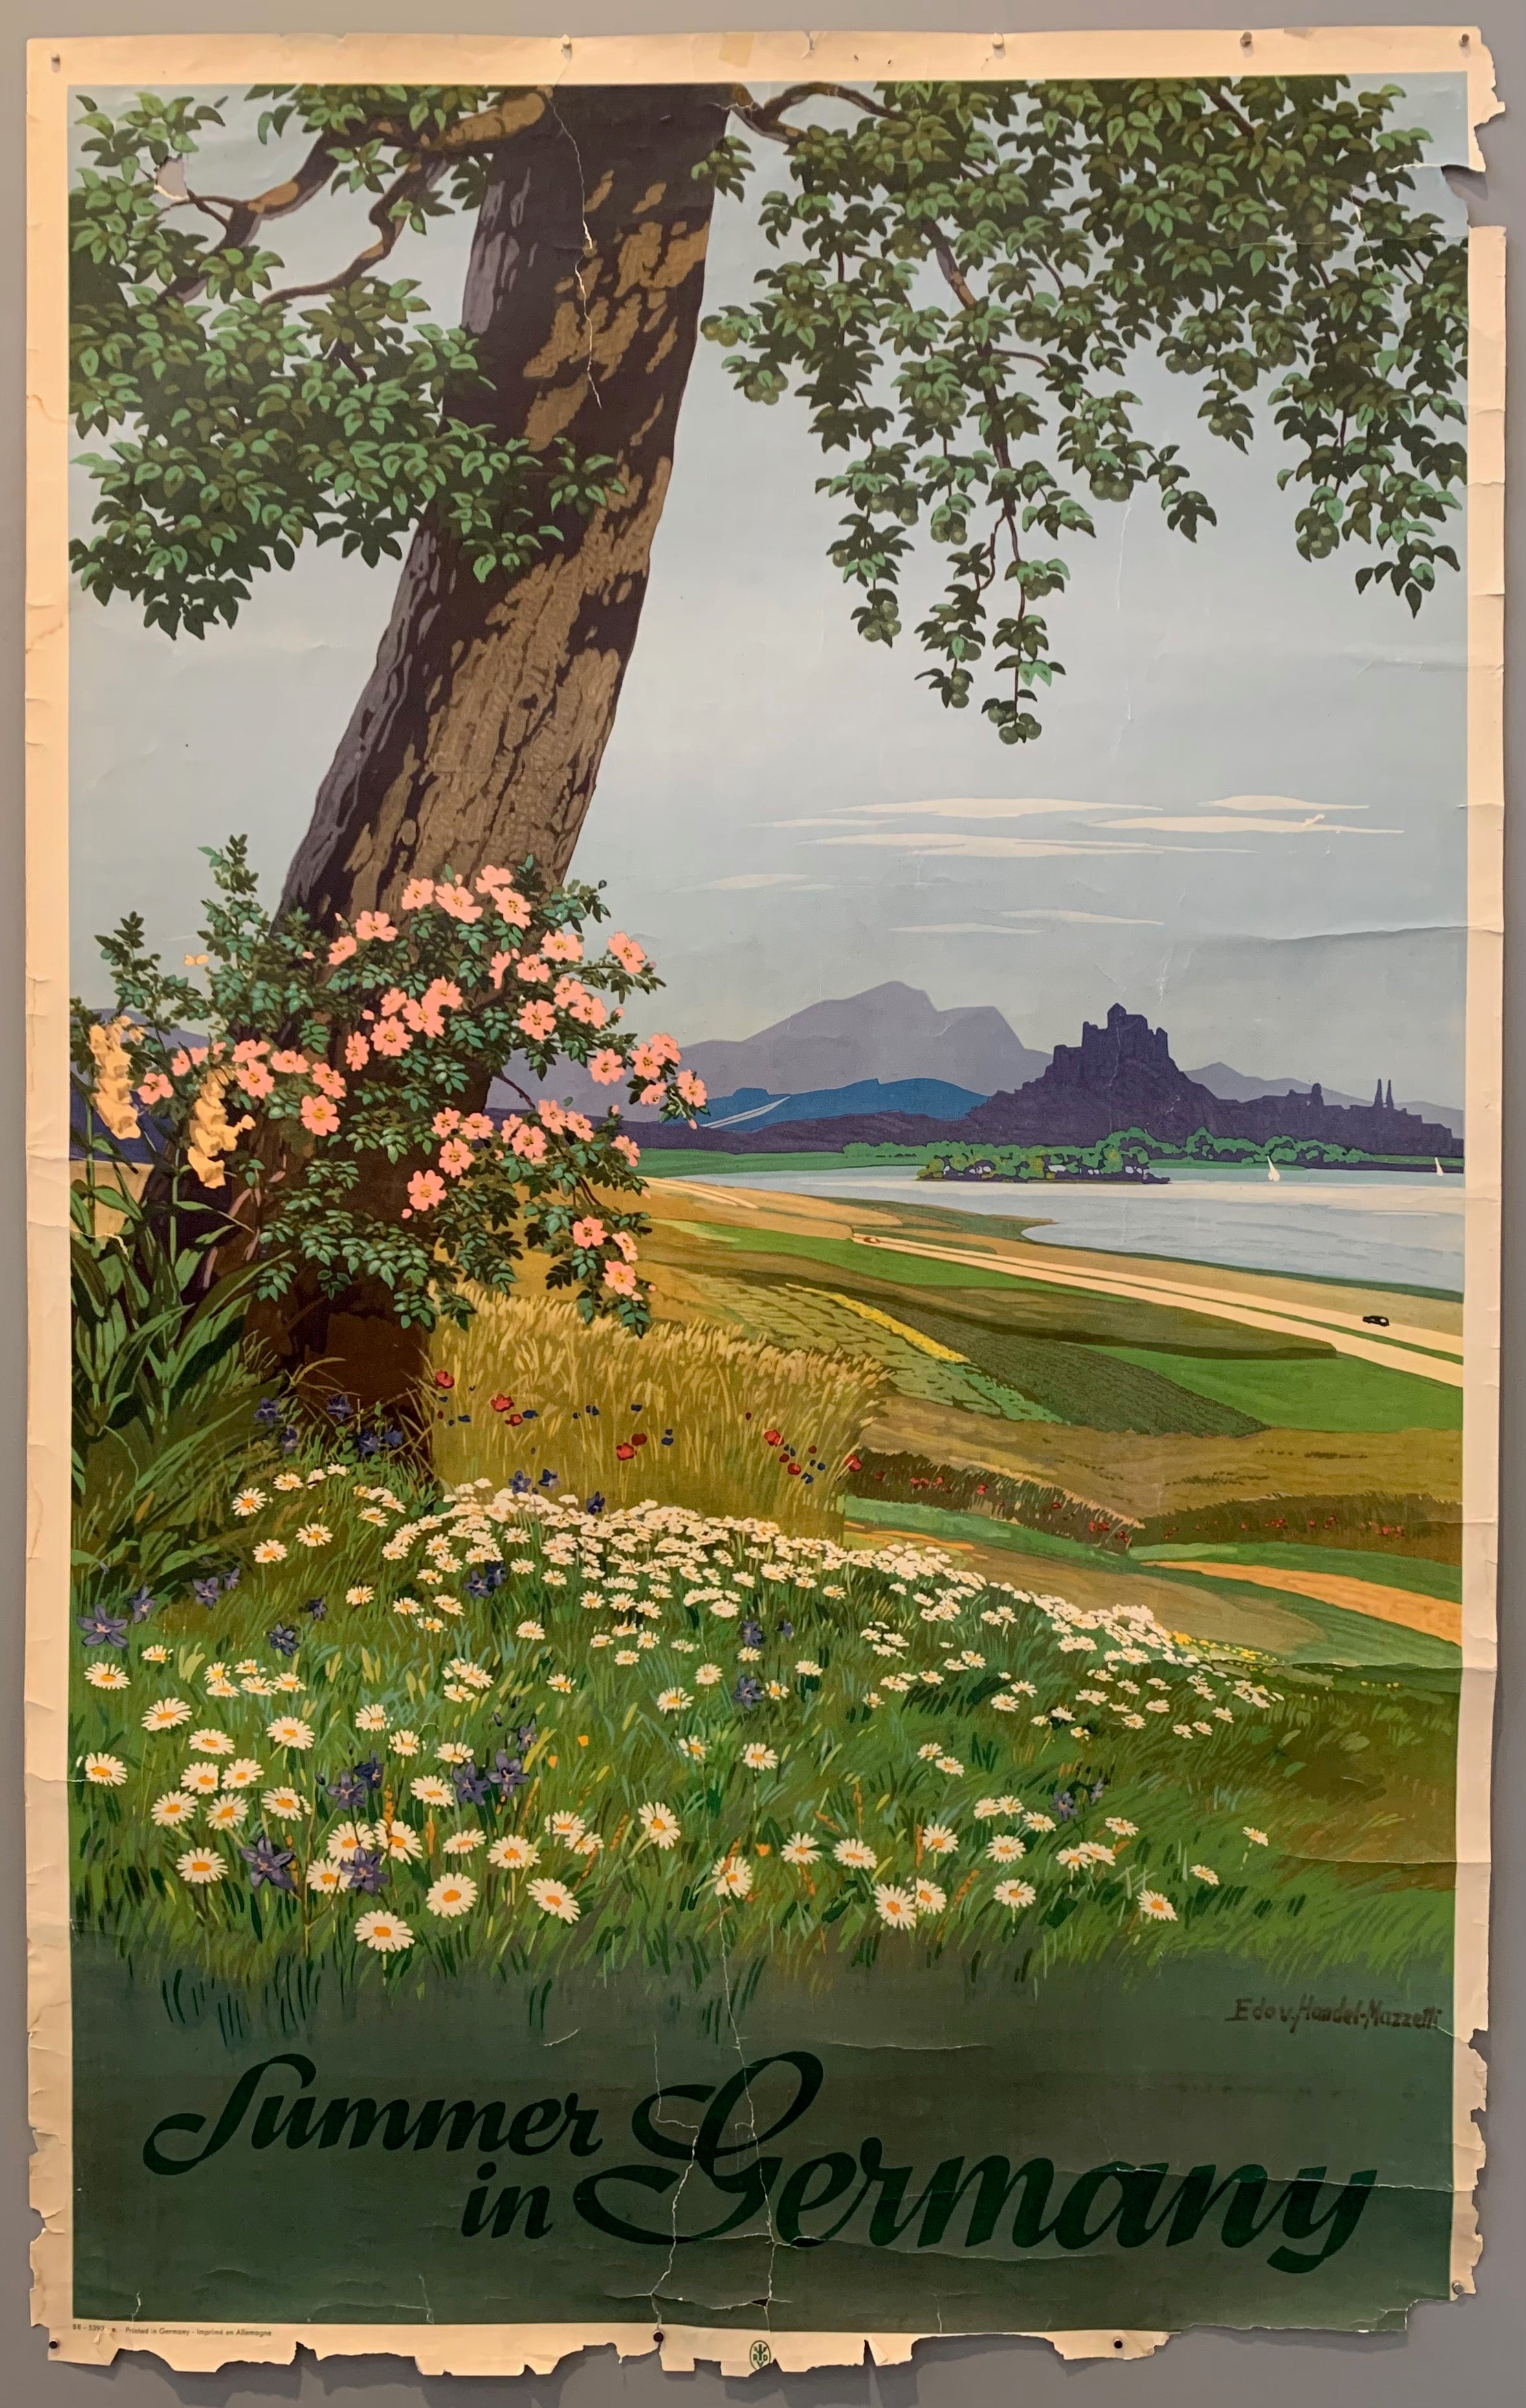 Beautiful german poster depicting a summer scene with a tree in the foreground and many blooming flowers. Mountains and a body of water pictured in the background.